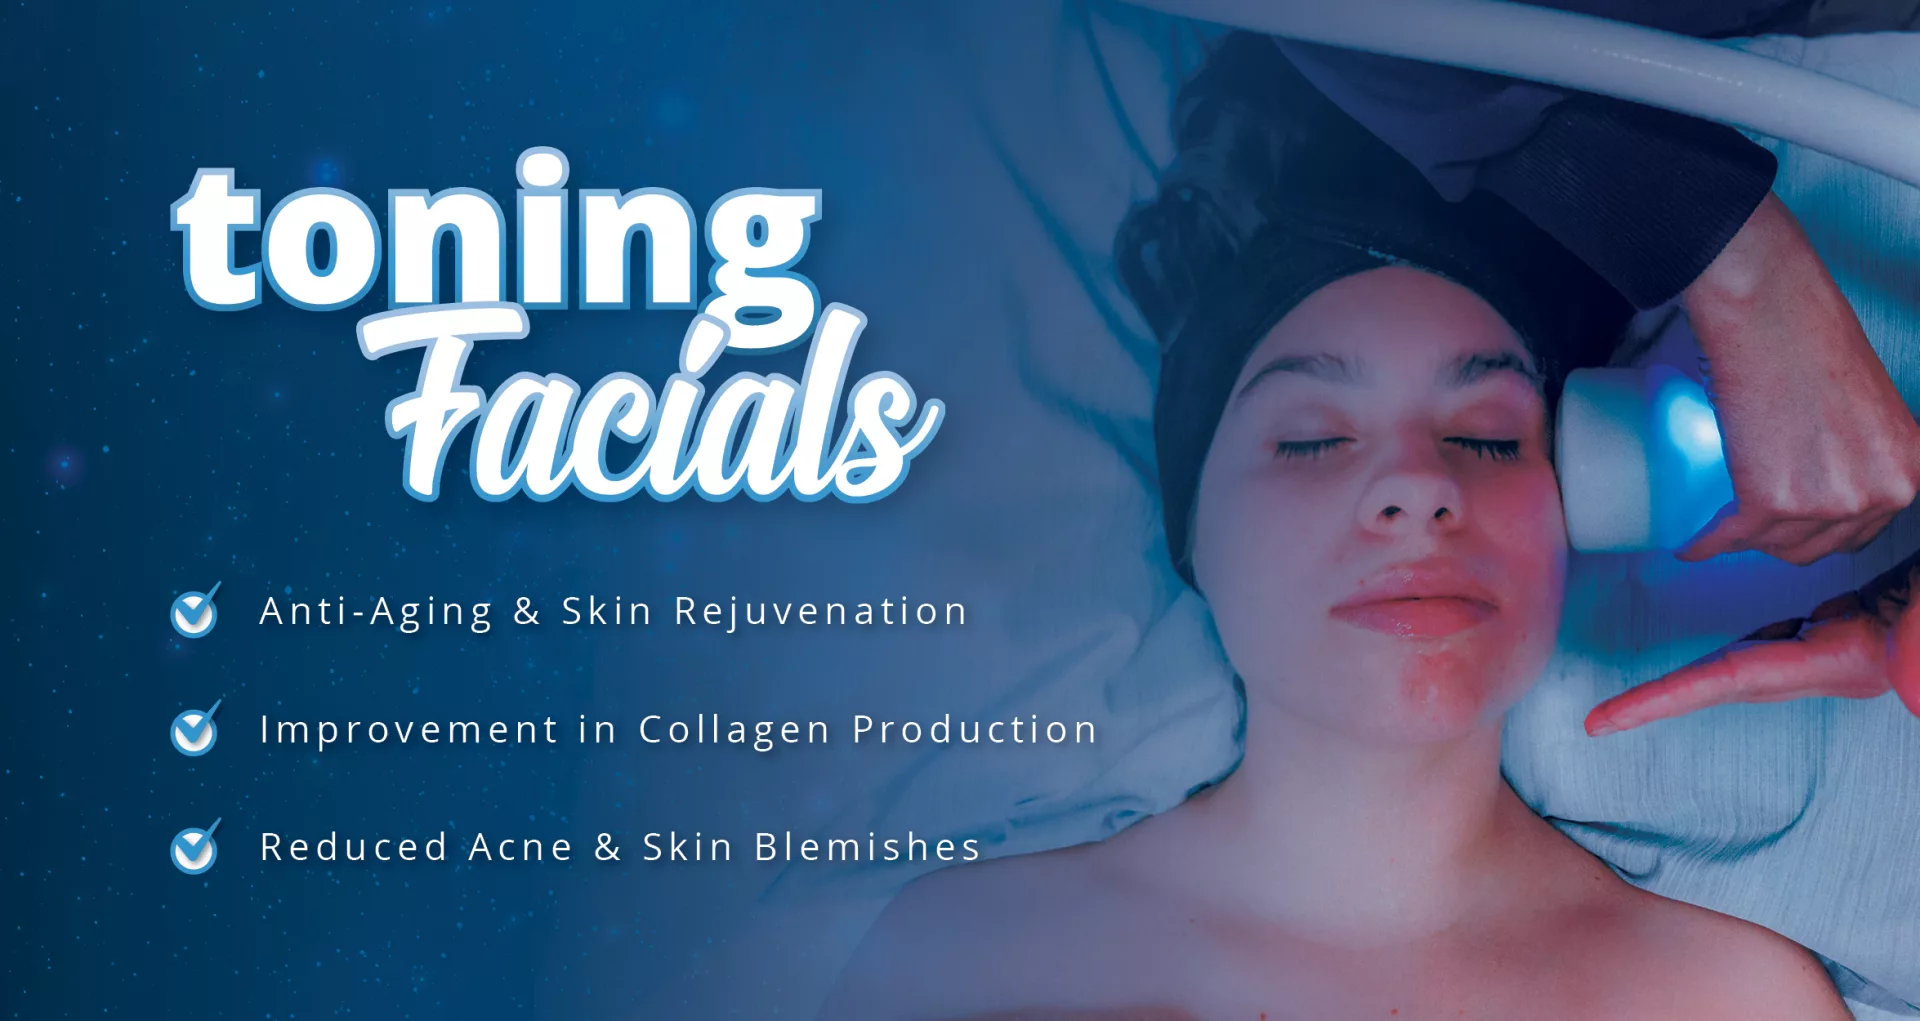 Elevate your skincare with iCRYO Toning Facials